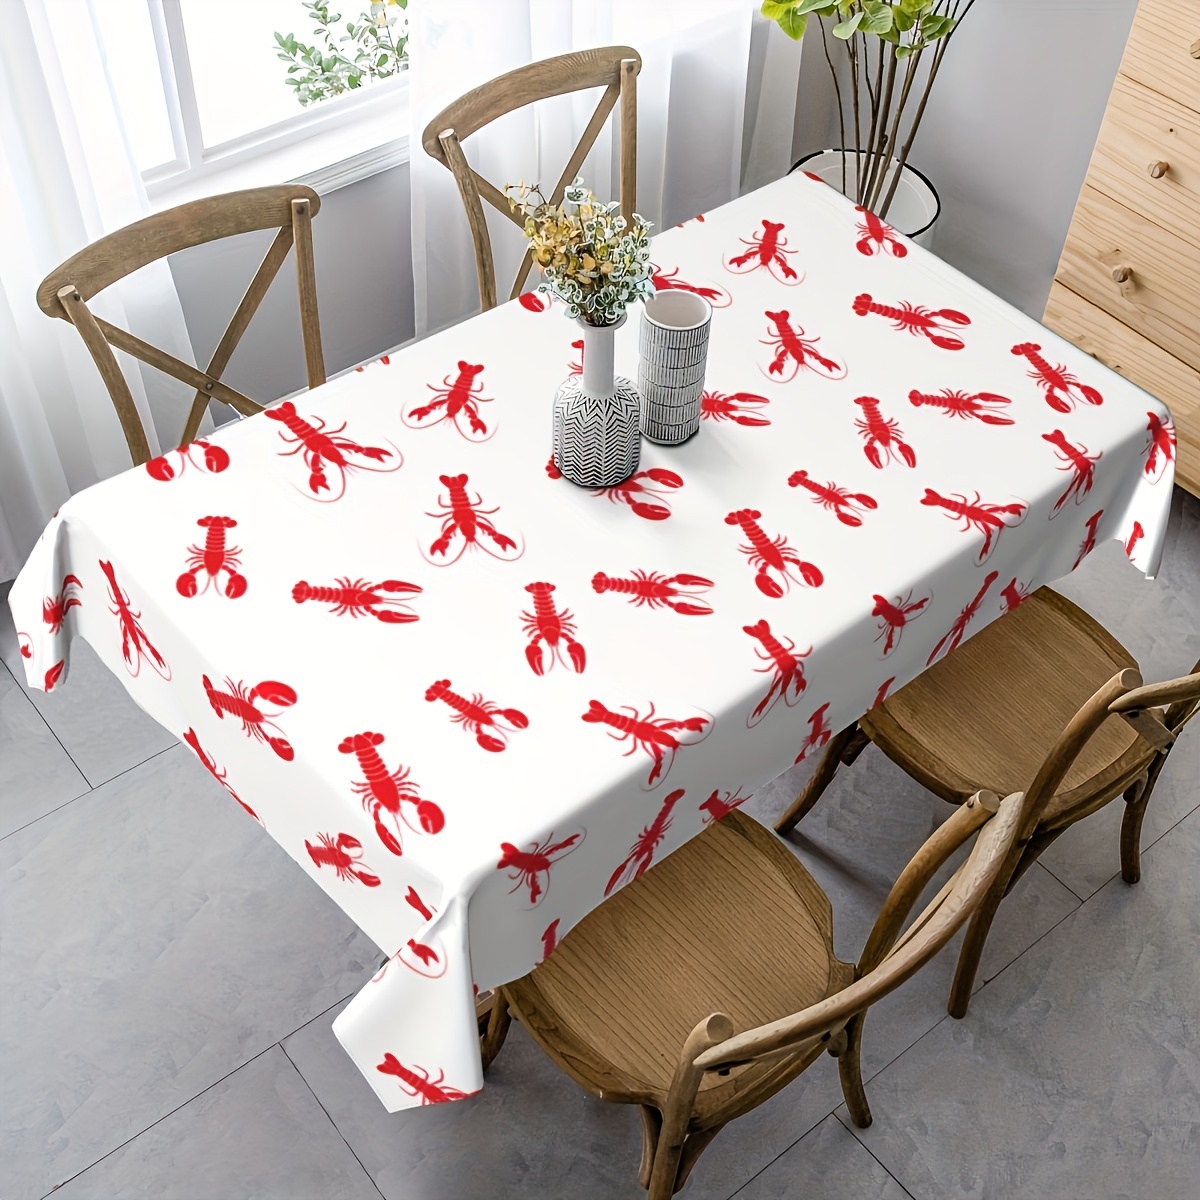 

3pack Lobster Table Set Lobster Tablecloth Lobster Banner Summer Lobster Birthday Holiday Barbecue Party Supplies In White And Red